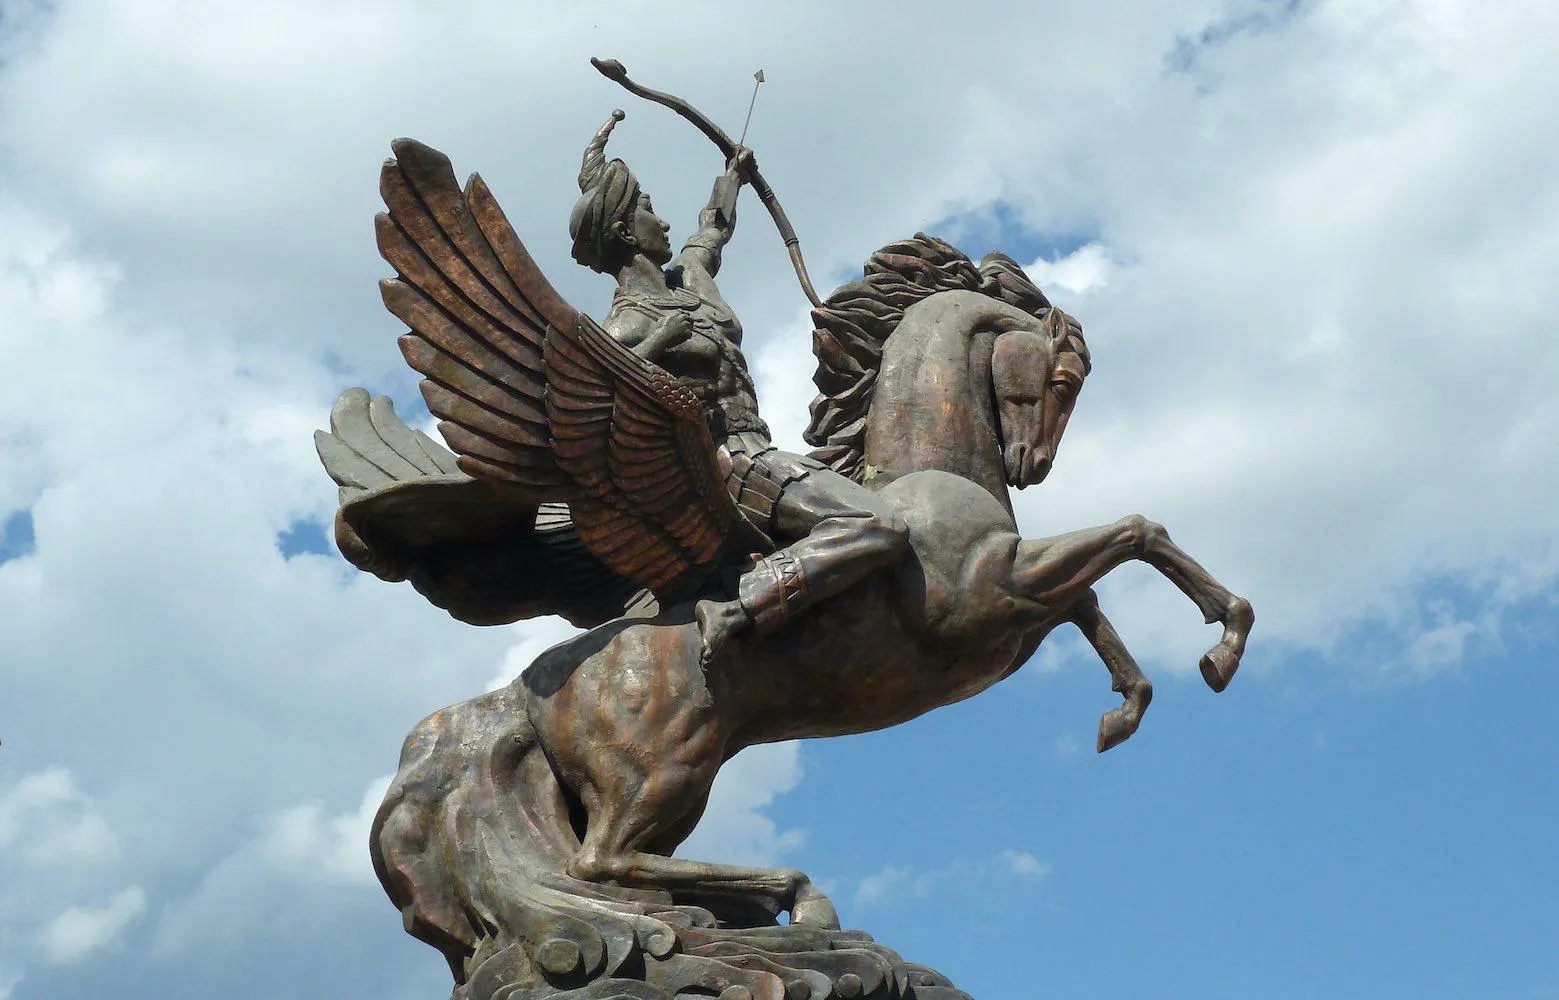 Statue of the Nuosu culture hero, Zhyge Alu, astride his winged horse in Southwest China. Copyright Katherine Swancutt 2011, all rights reserved. Used with permission.